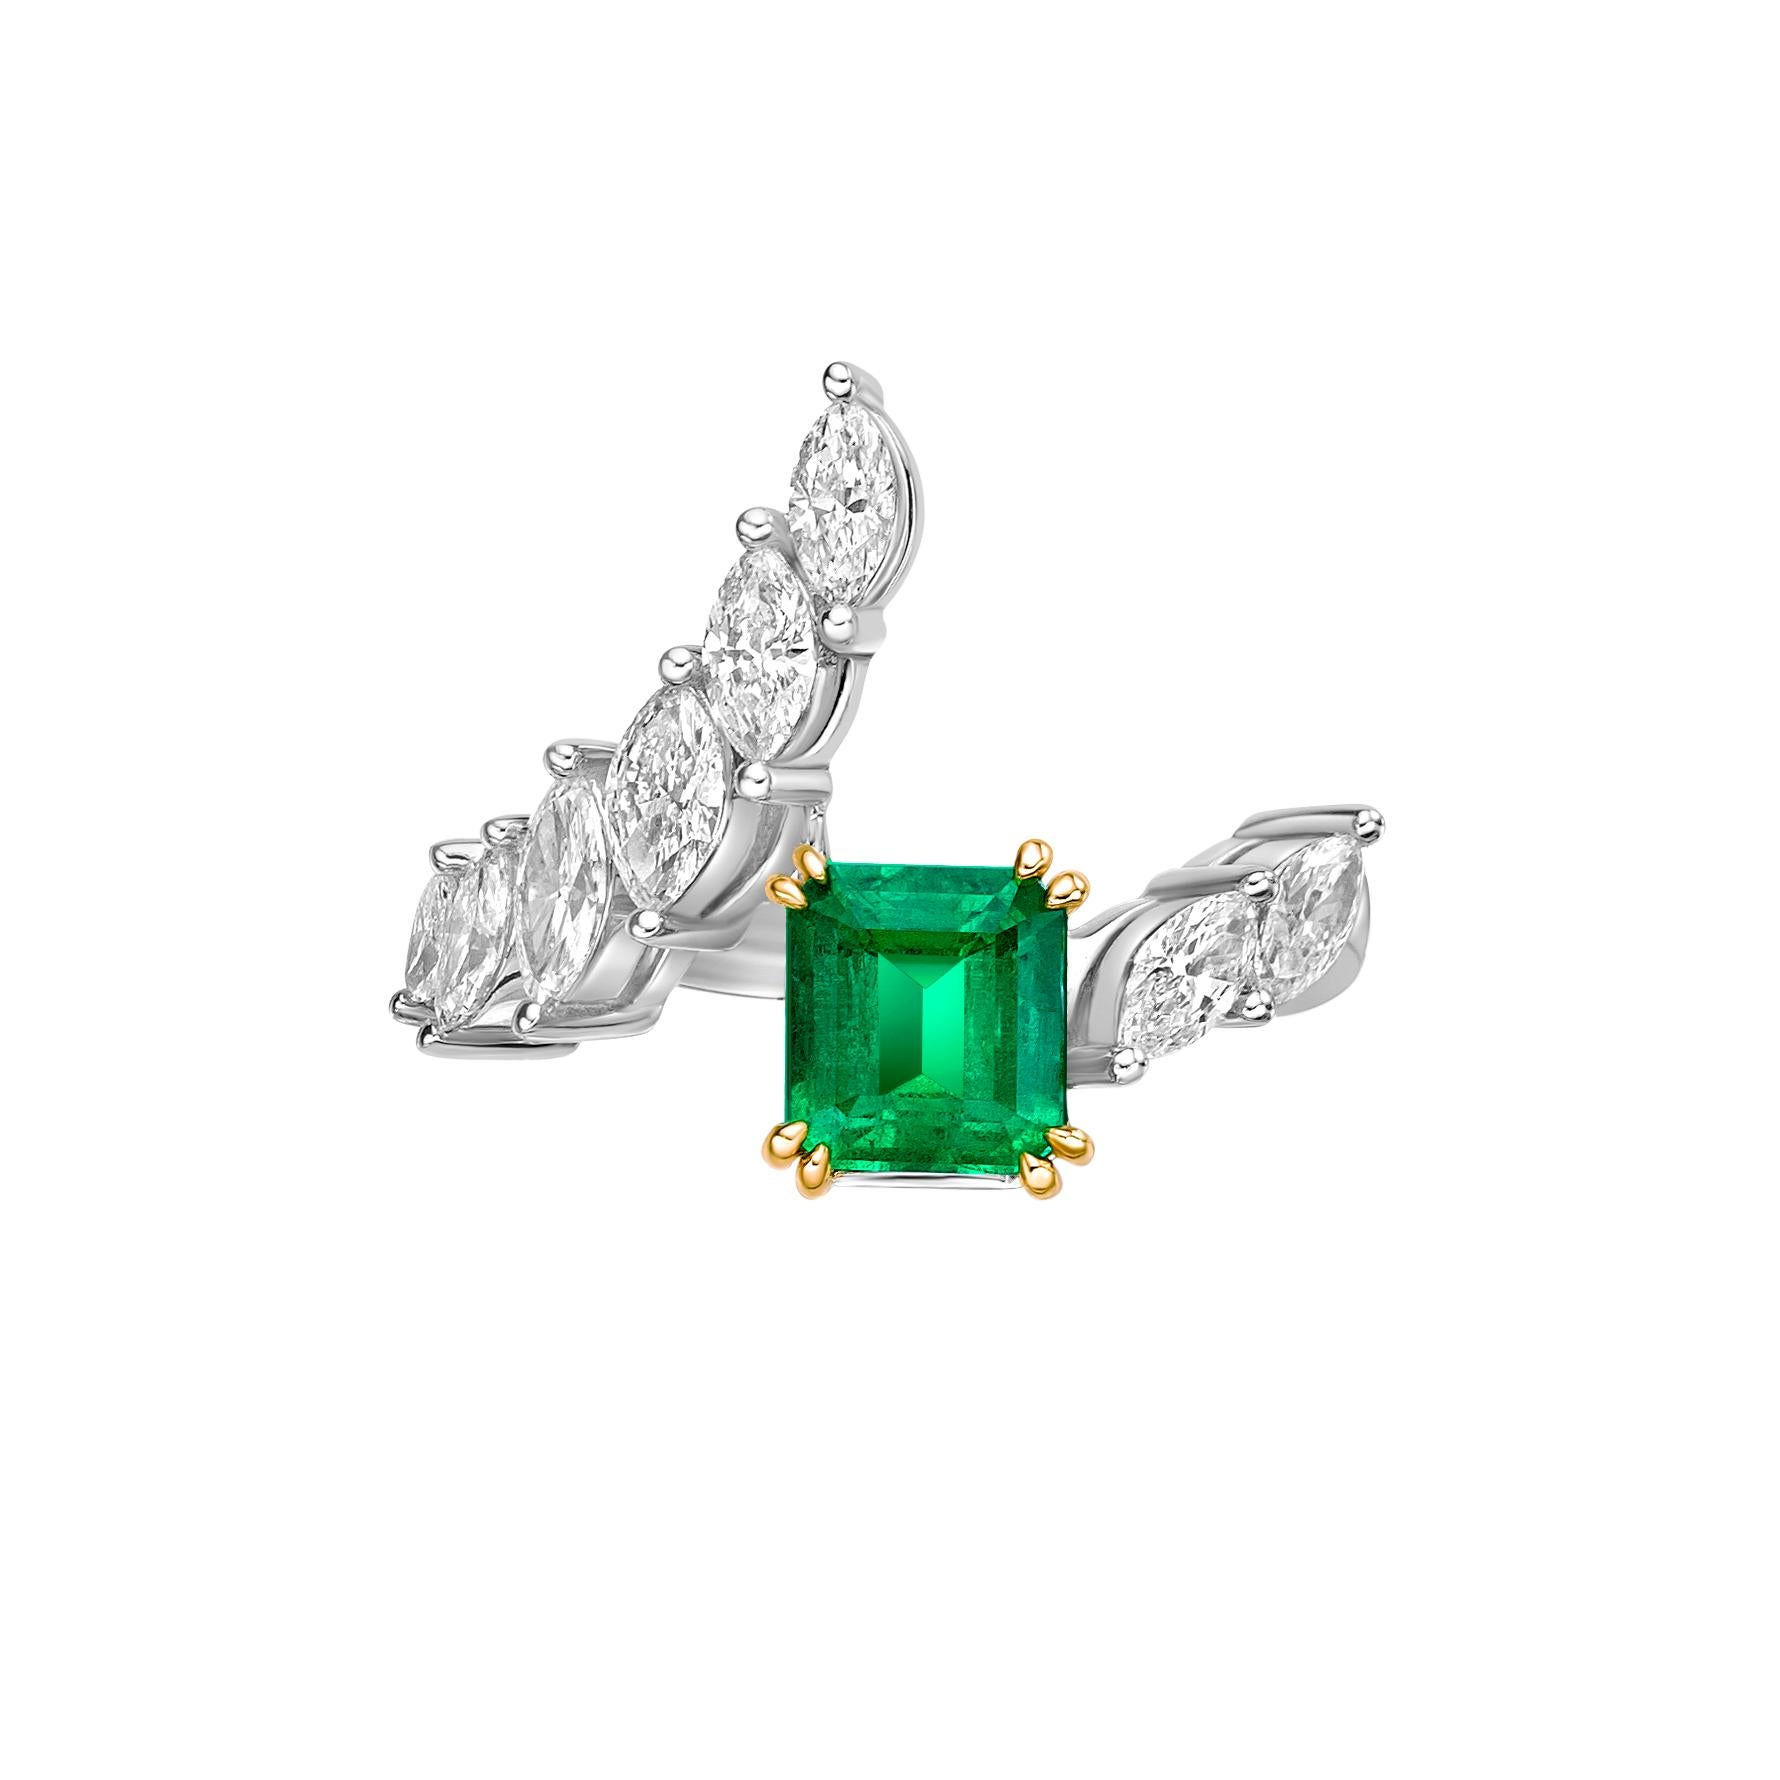 Contemporary 1.46 Carat Emerald Fancy Ring in 18Karat Yellow Gold with White Diamond. For Sale